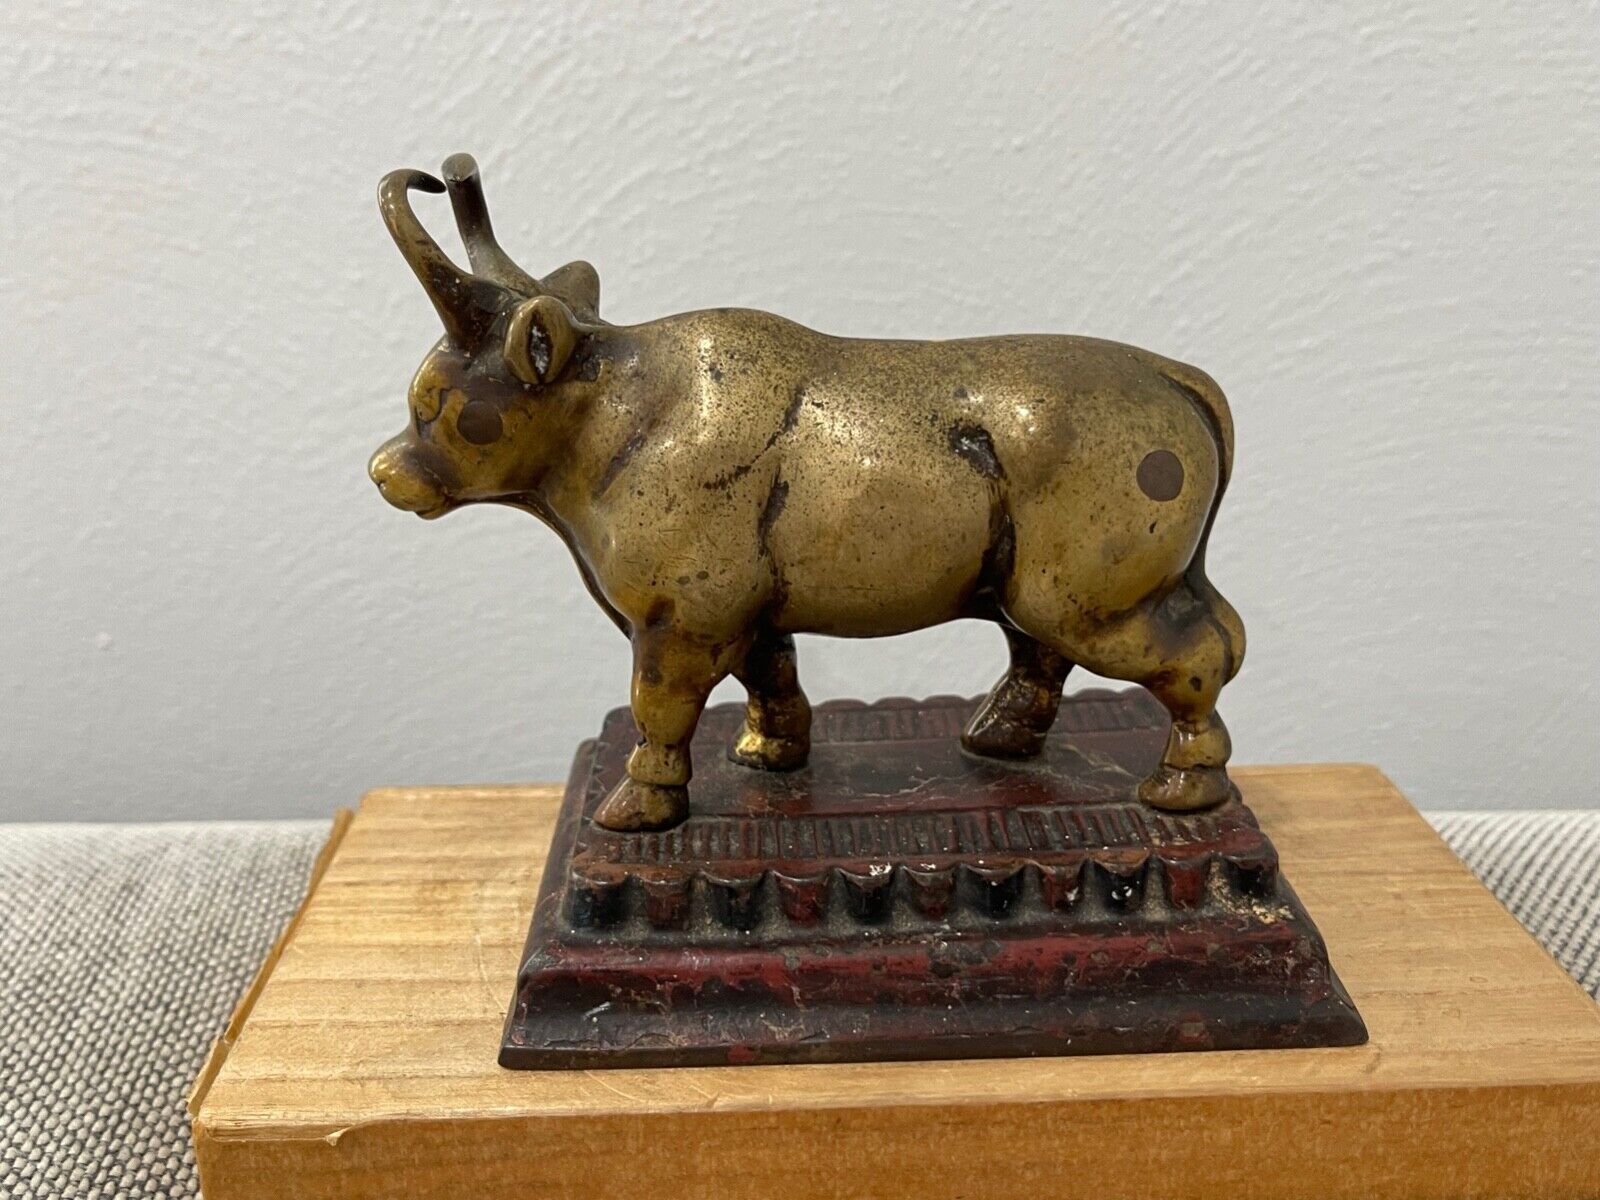 Vintage Possibly Antique Asian Metal Bull Statue / Figurine